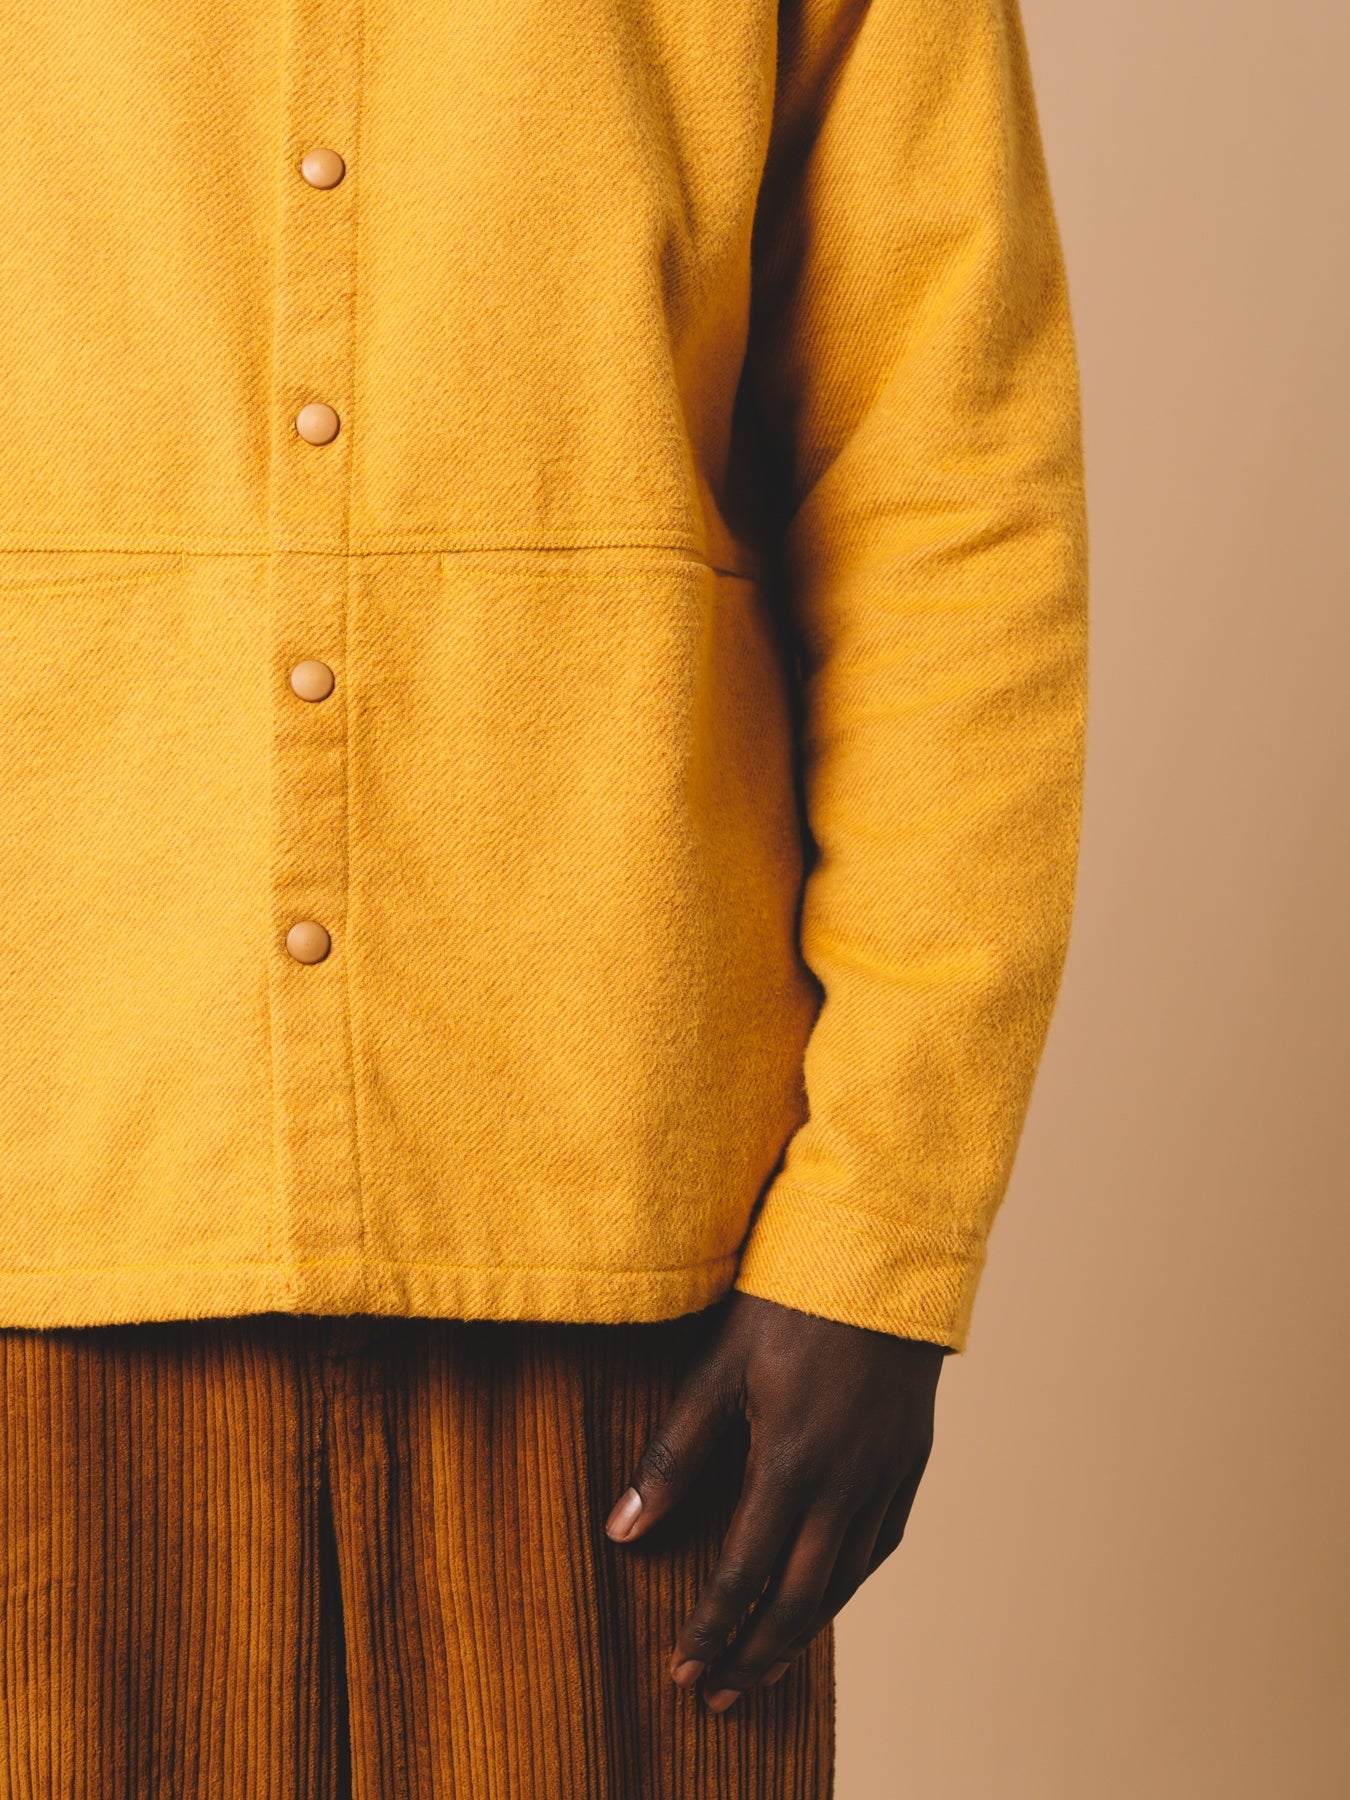 A close-up of the Armadale Overshirt from KESTIN, made from a yellow brushed cotton.